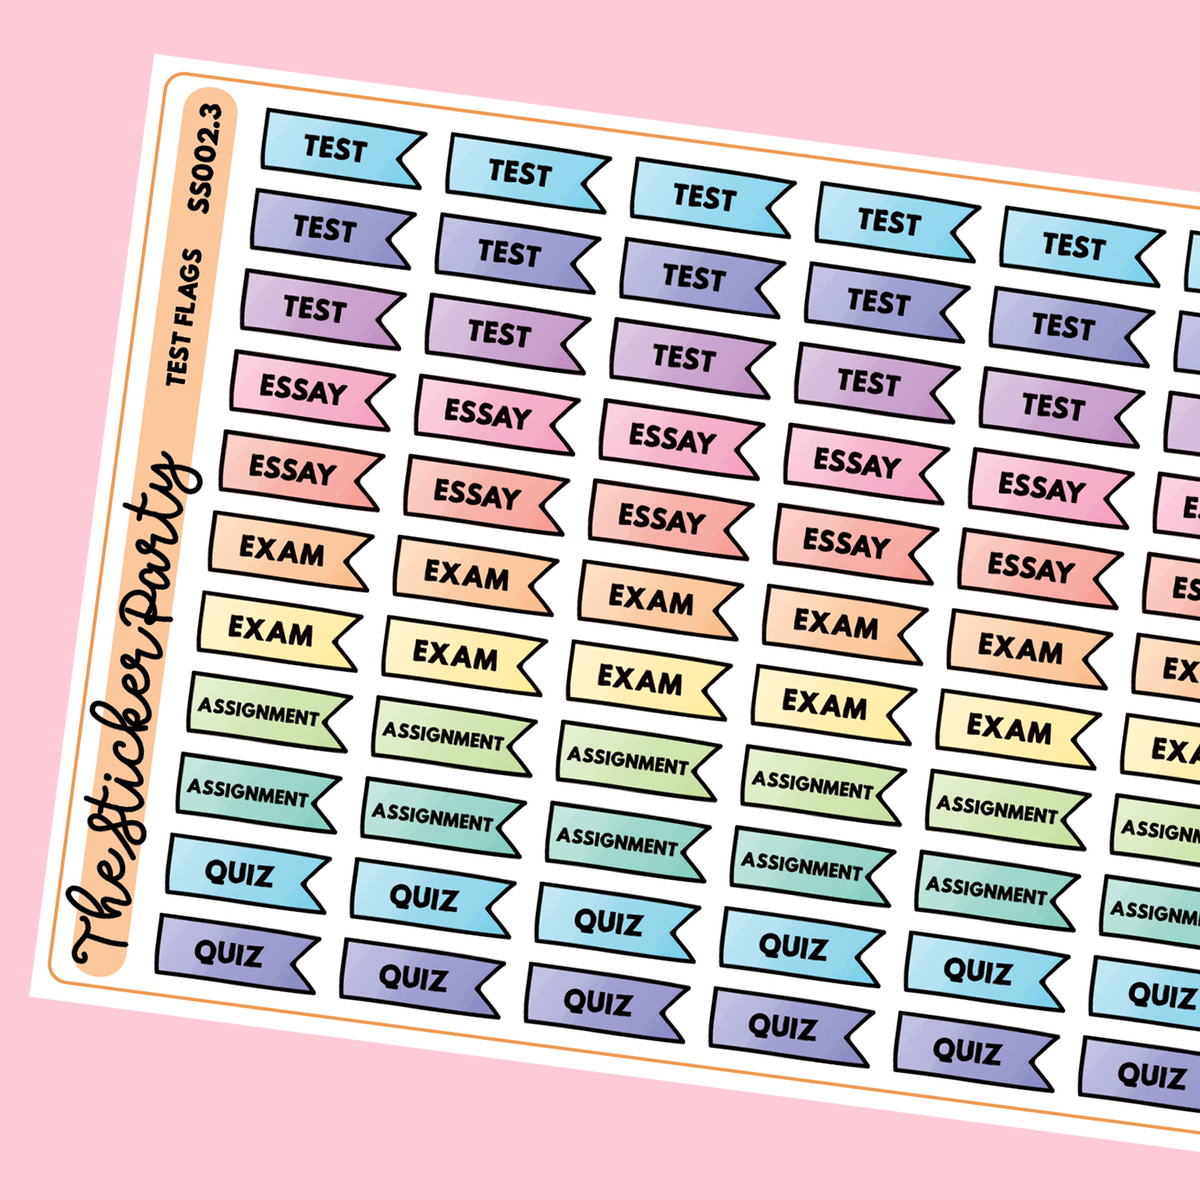 Quiz Student Planner Stickers - School Stickers - Appointment Stickers –  Get Sheet Done